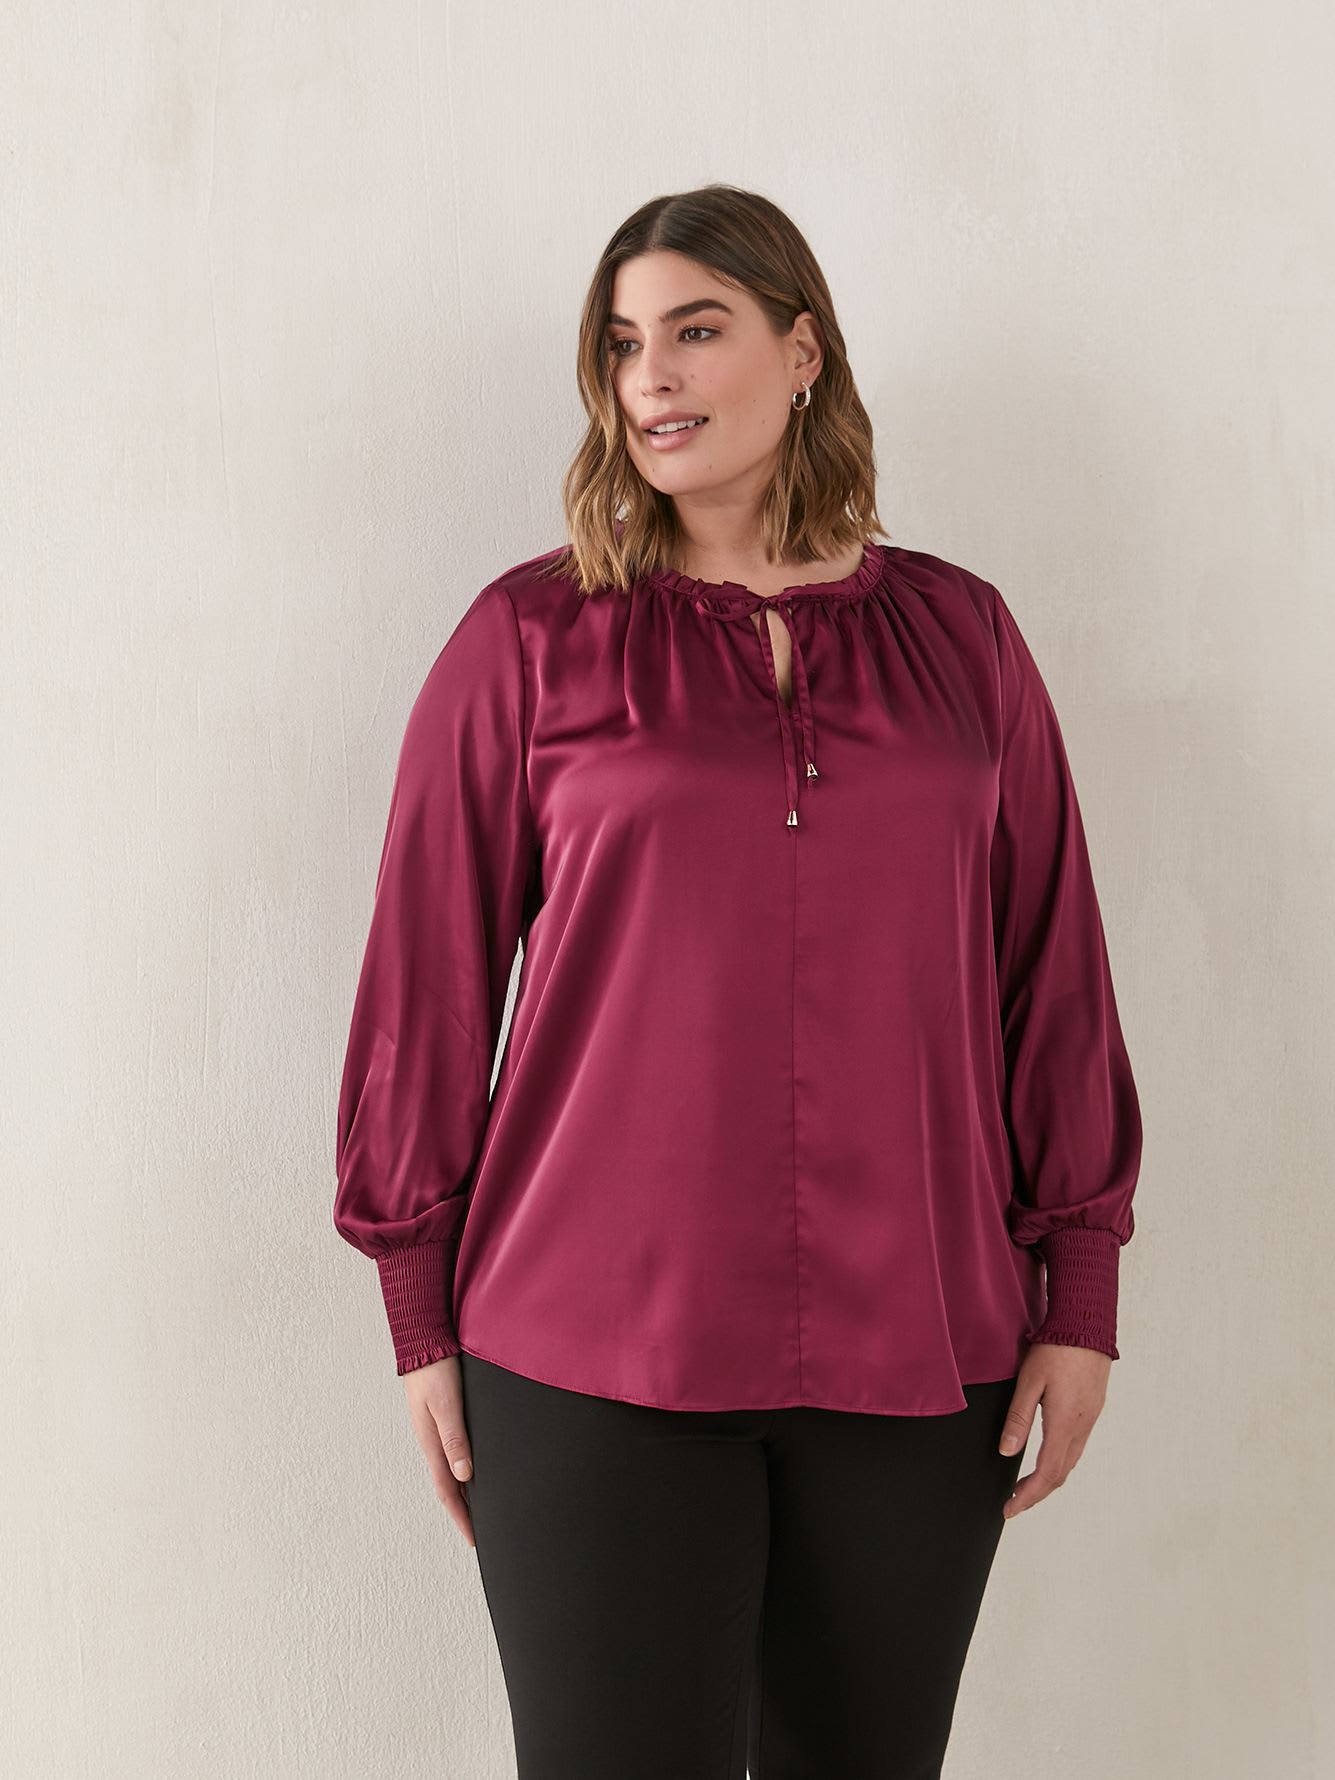 Satin Blouse With Split Neck and Ties - In Every Story